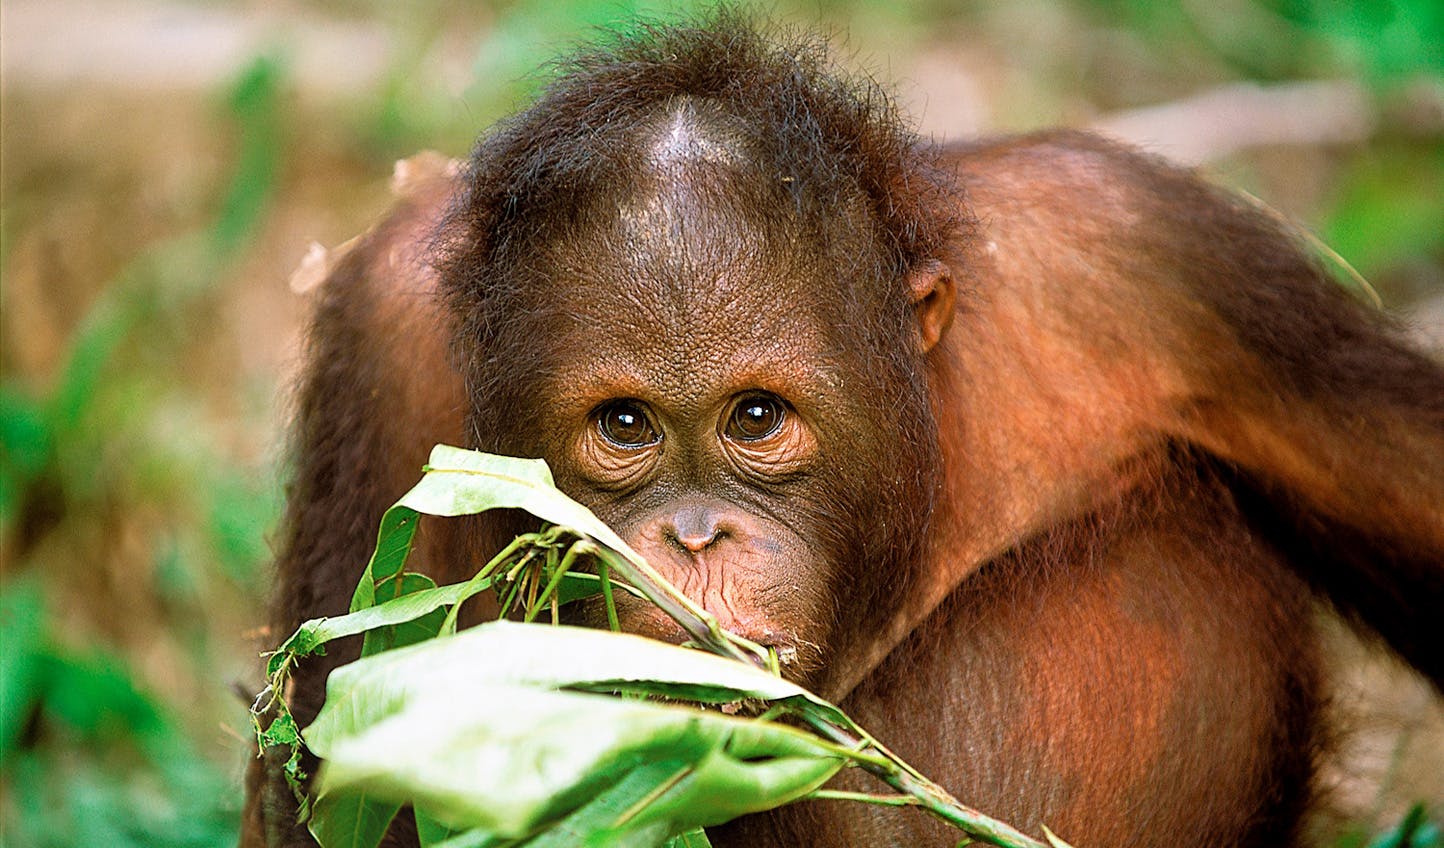 Baby primates are still openly sold in Bali market: JAAN